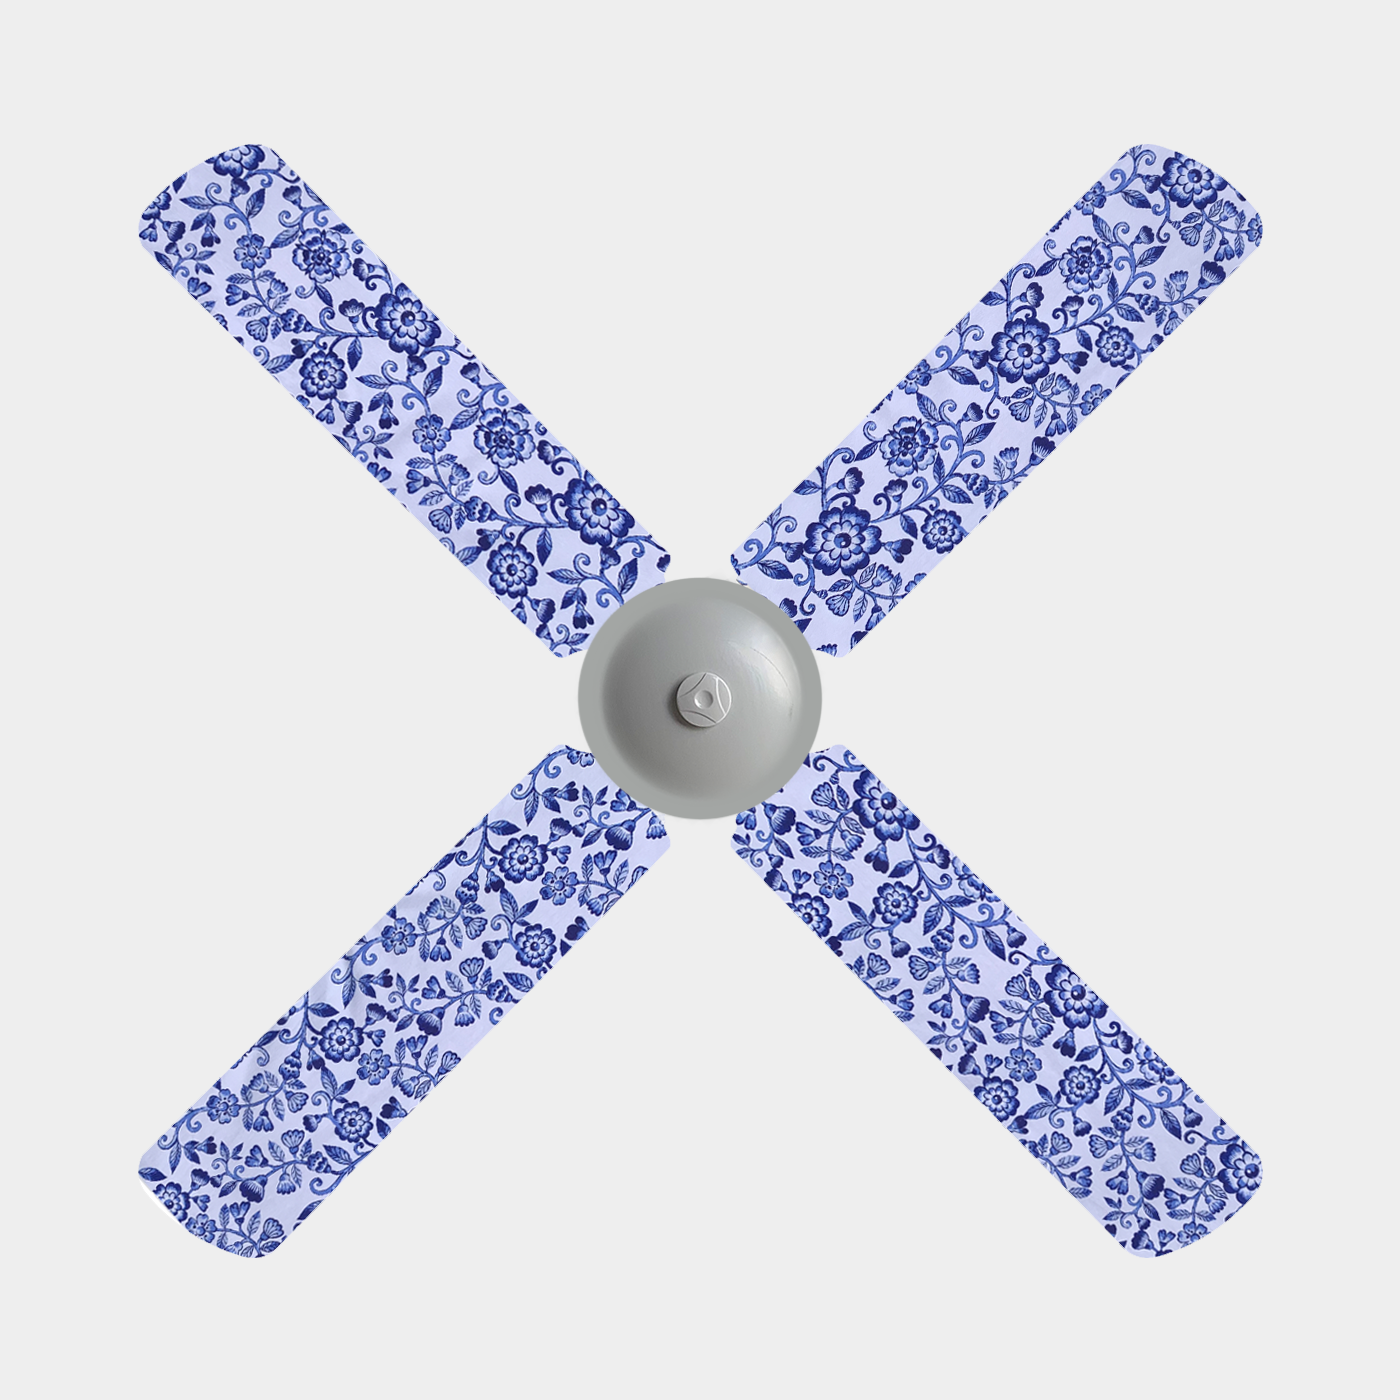 Four fan blade covers with blue hamptons-inspired flowers on a white background